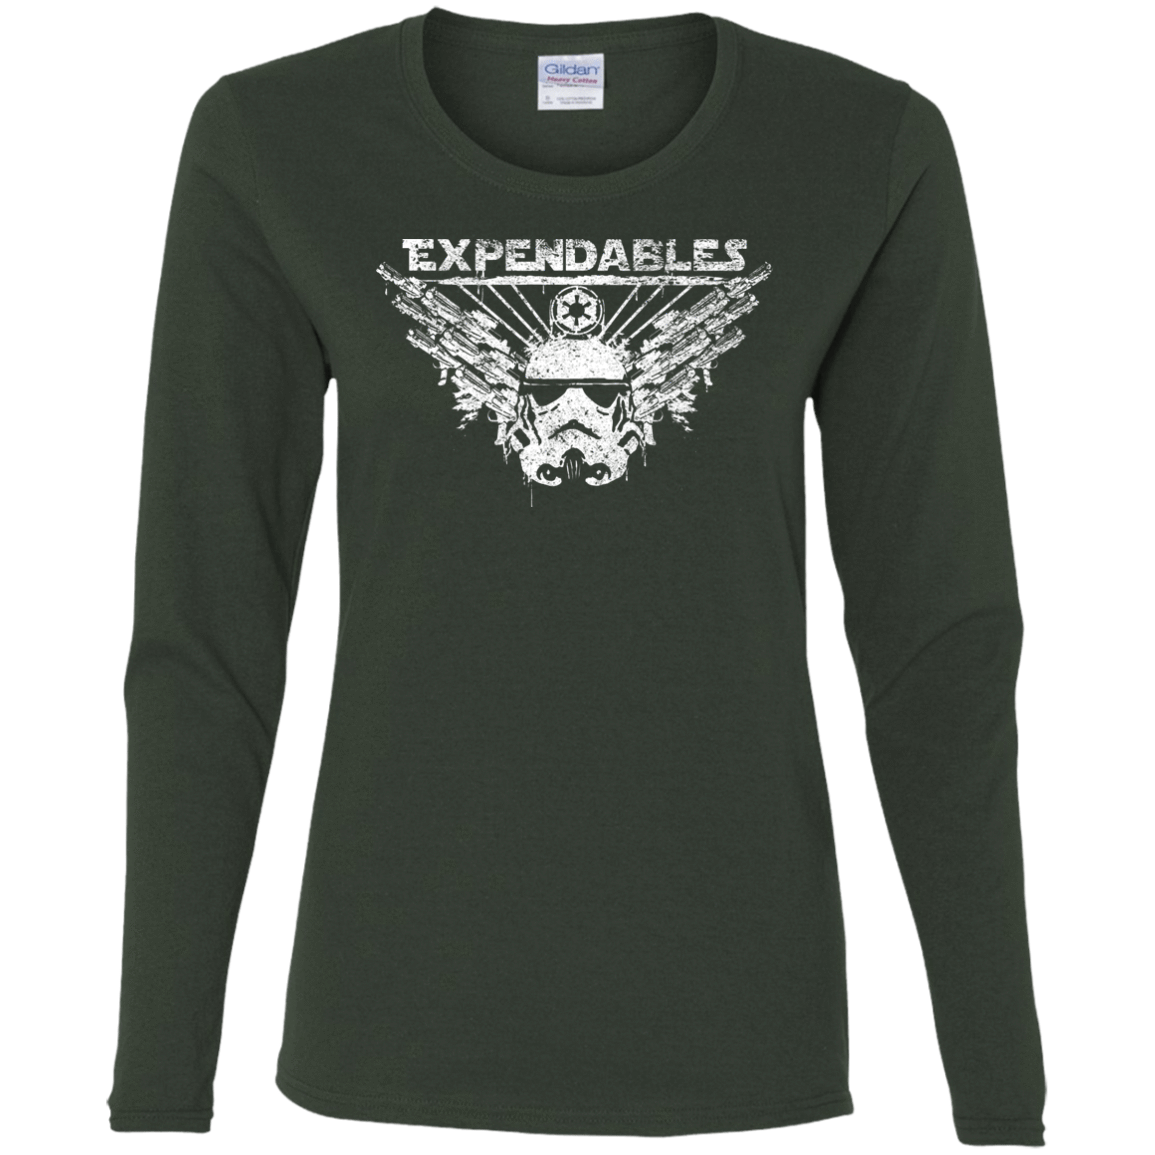 T-Shirts Forest / S Expendable Troopers Women's Long Sleeve T-Shirt